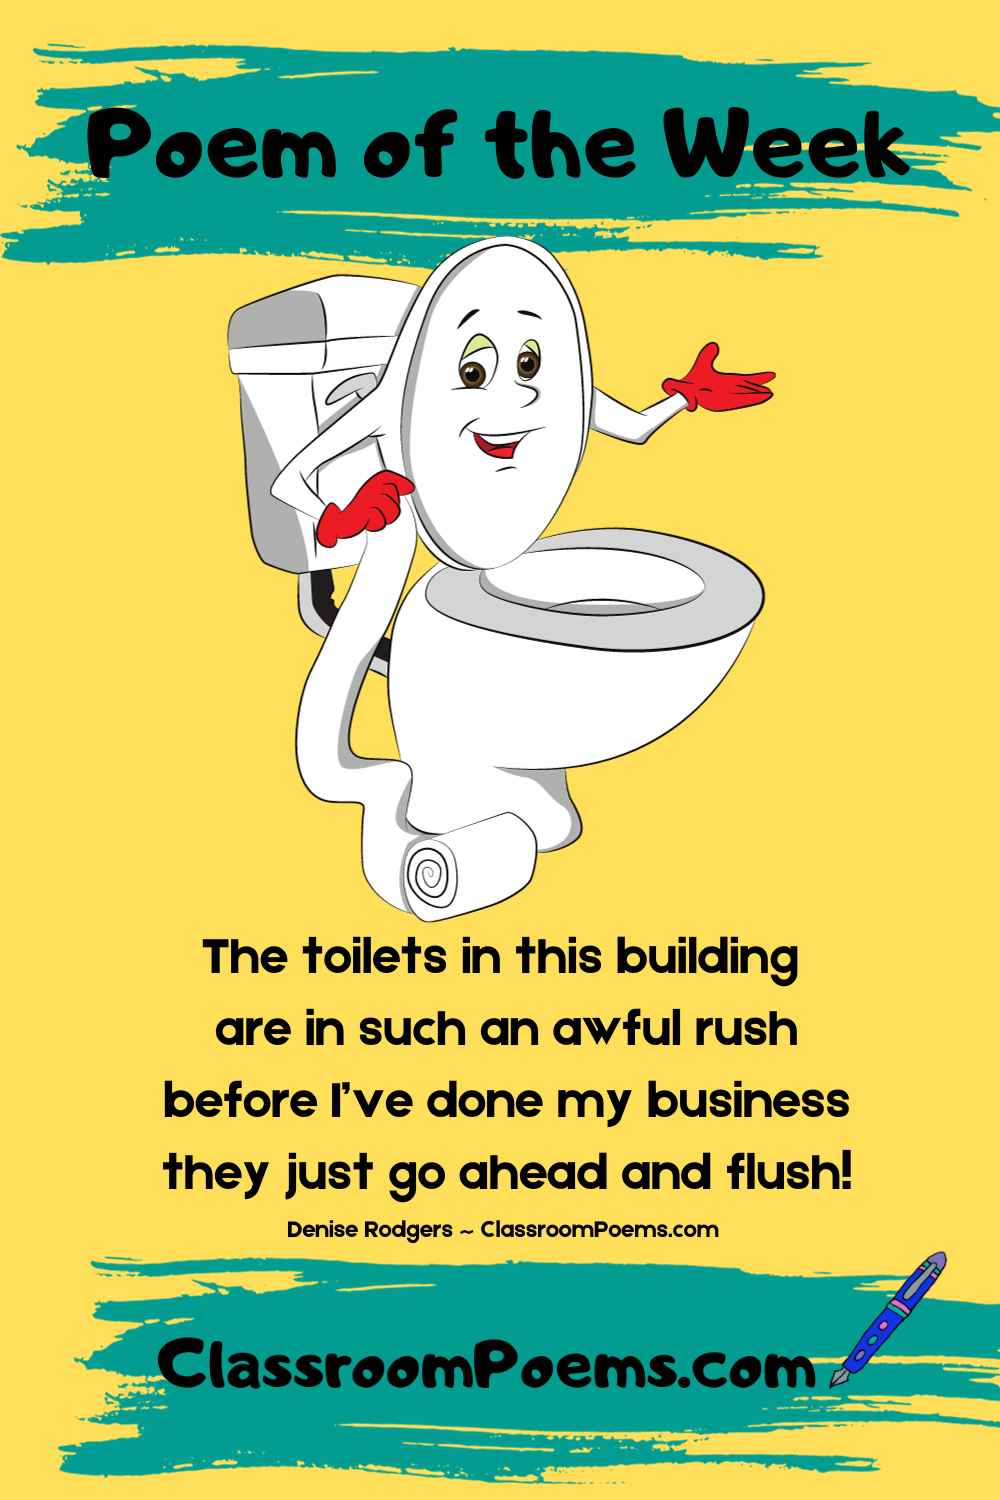 A Rushing Toilet Poem on the Poem of the Week page by Denise Rodgers on ClassroomPoems.com.